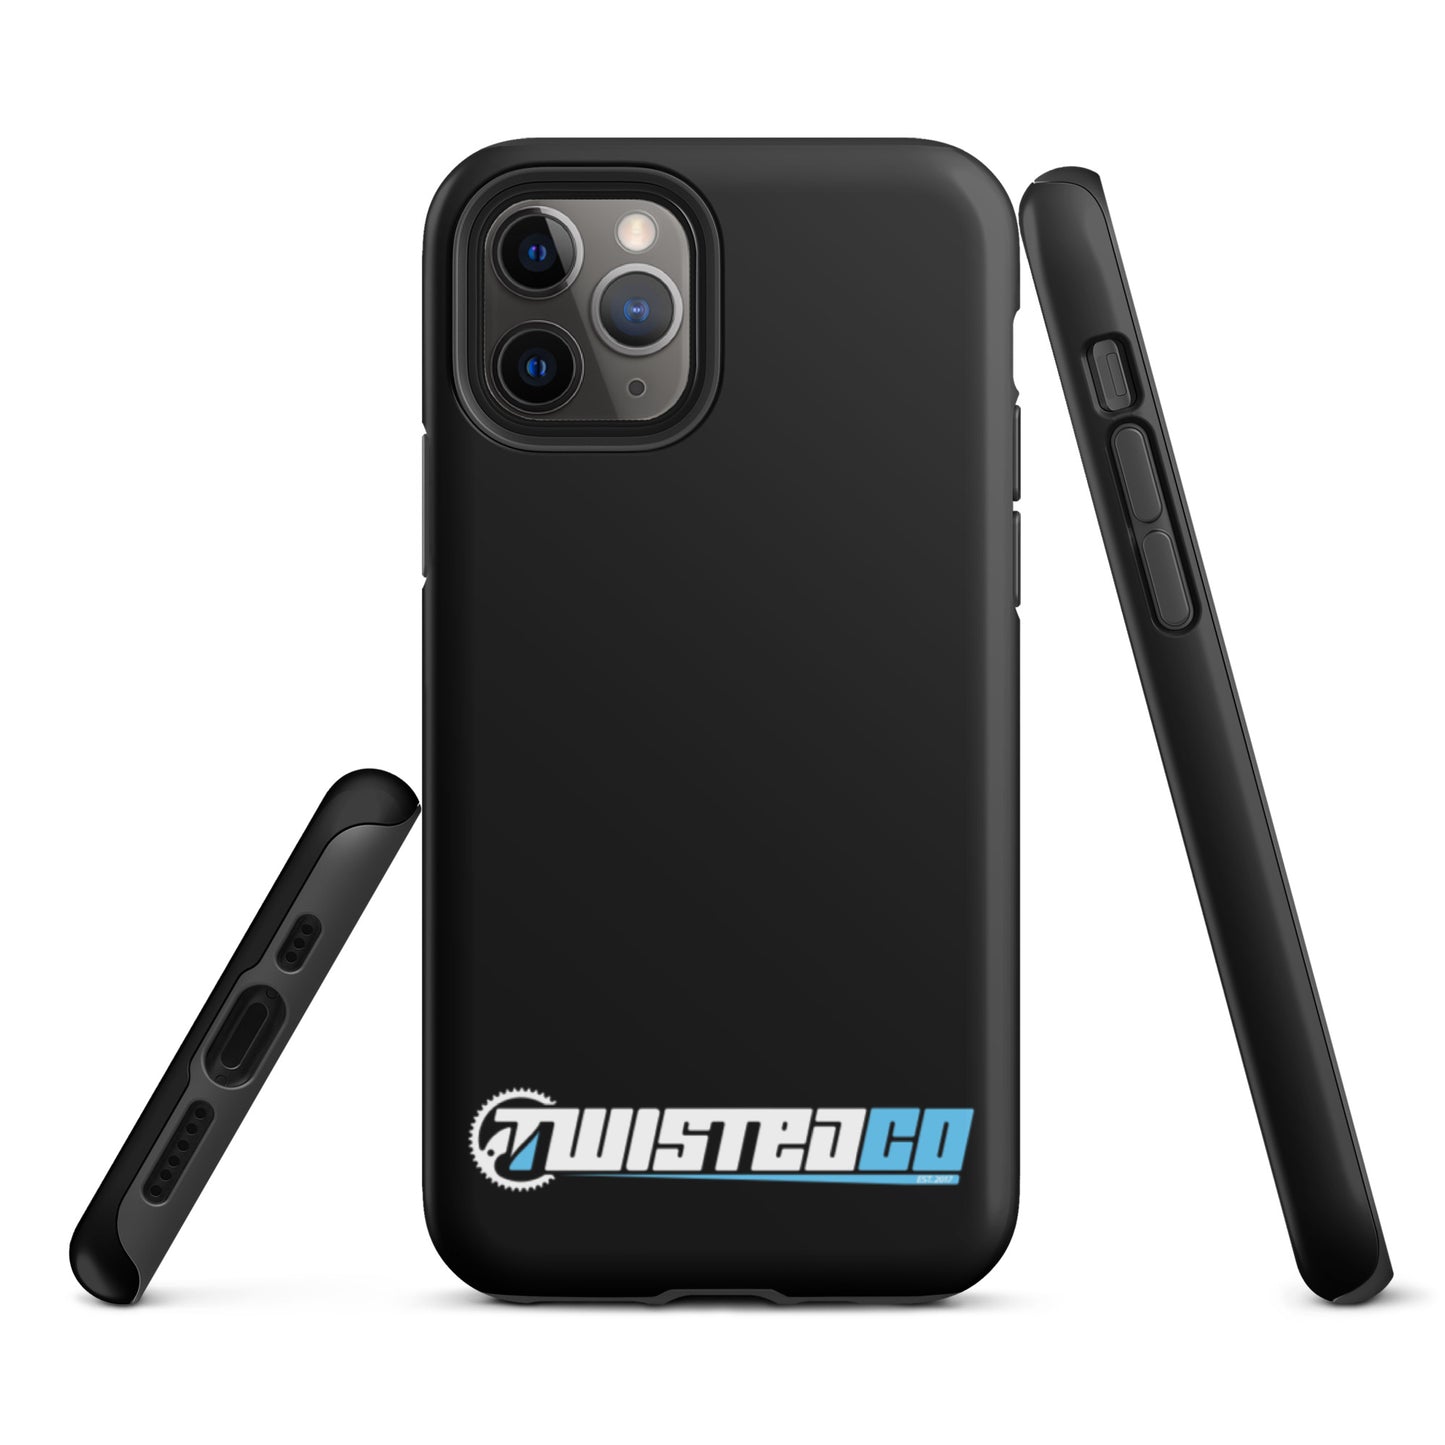 Twisted Co Tough iPhone case